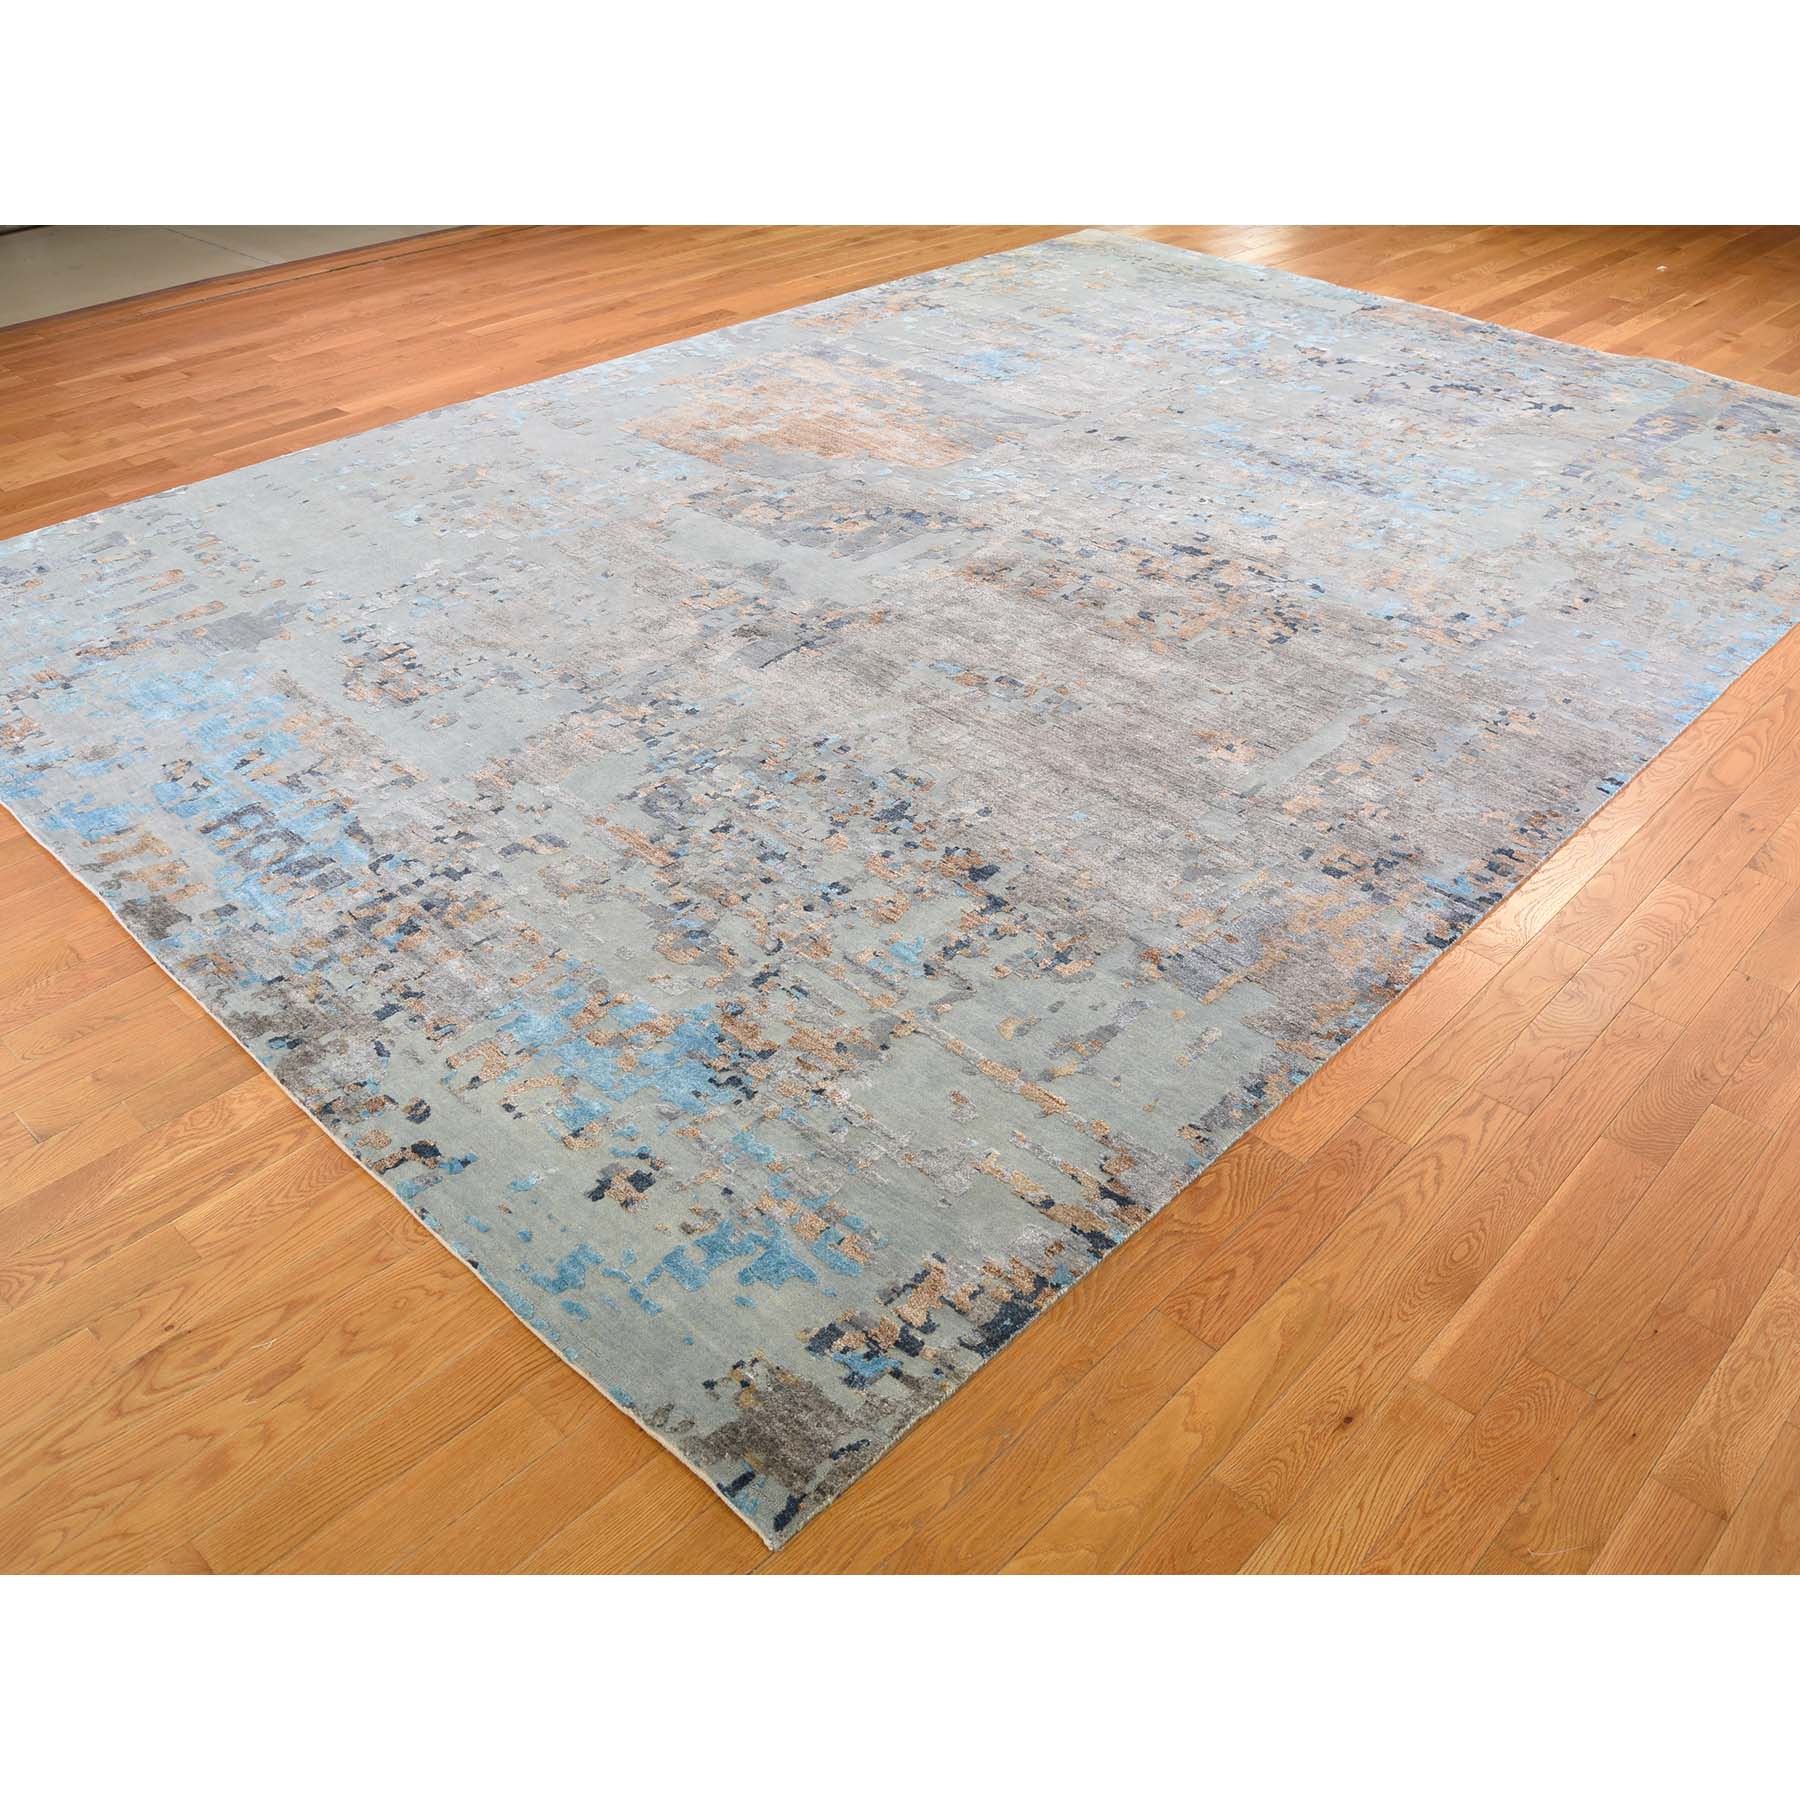 10-1 x14-2  Abstract Design Wool and Silk Hi-low Pile Hand Knotted Oriental Rug 